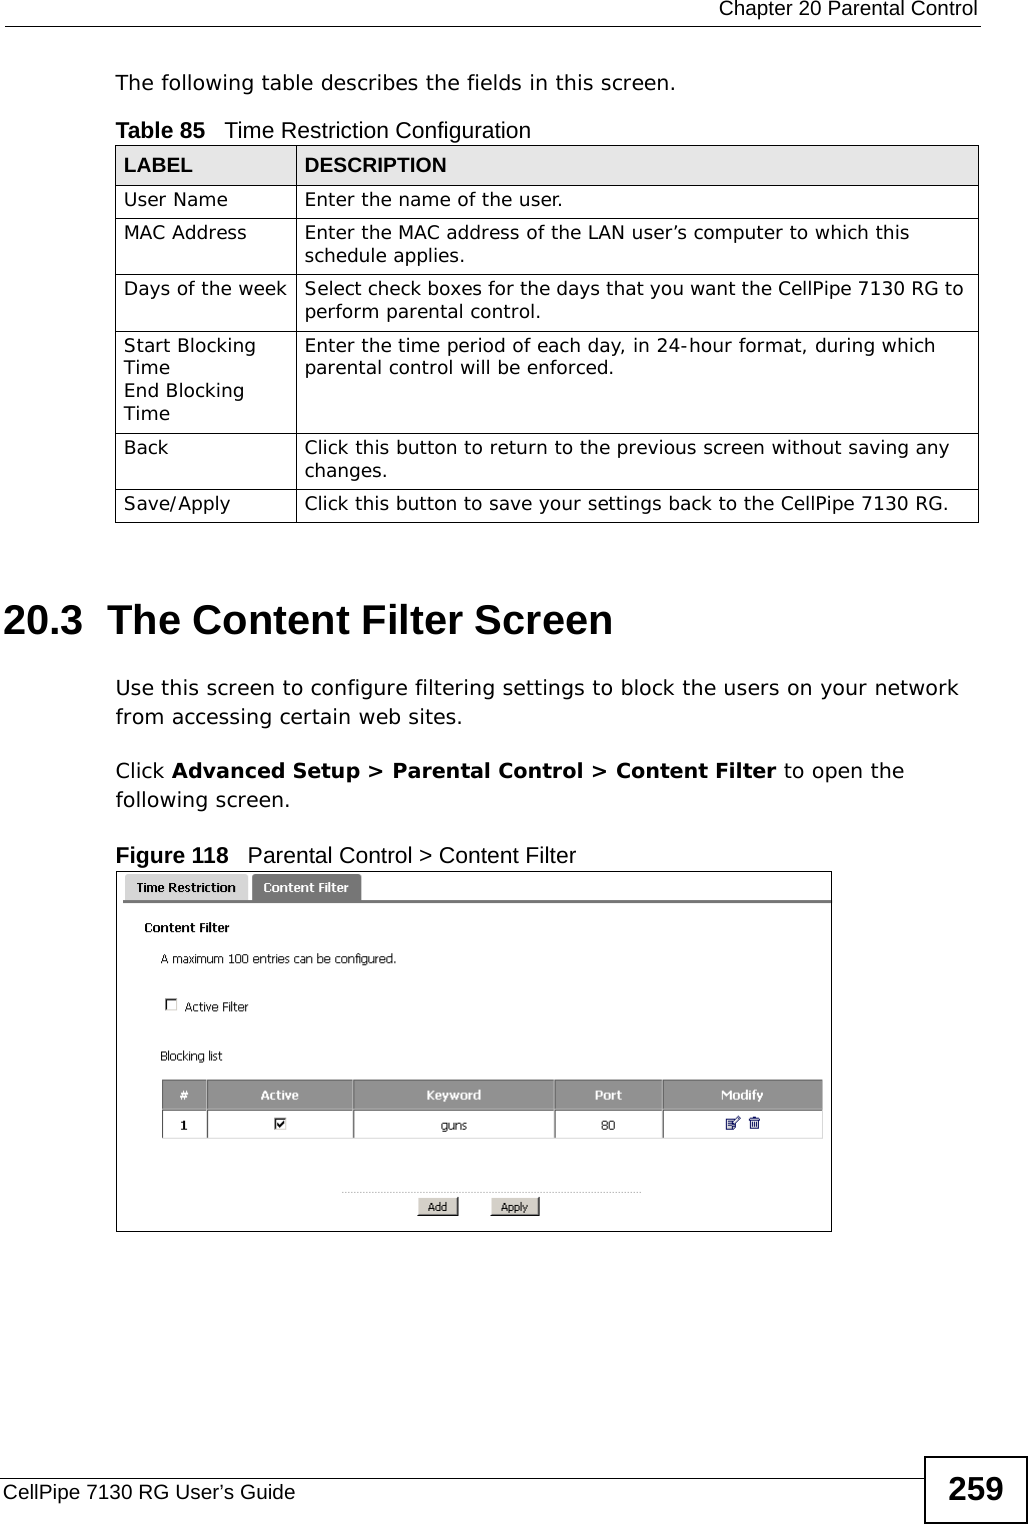  Chapter 20 Parental ControlCellPipe 7130 RG User’s Guide 259The following table describes the fields in this screen. 20.3  The Content Filter ScreenUse this screen to configure filtering settings to block the users on your network from accessing certain web sites.Click Advanced Setup &gt; Parental Control &gt; Content Filter to open the following screen. Figure 118   Parental Control &gt; Content Filter Table 85   Time Restriction ConfigurationLABEL DESCRIPTIONUser Name Enter the name of the user.MAC Address Enter the MAC address of the LAN user’s computer to which this schedule applies.Days of the week Select check boxes for the days that you want the CellPipe 7130 RG to perform parental control. Start Blocking TimeEnd Blocking TimeEnter the time period of each day, in 24-hour format, during which parental control will be enforced. Back Click this button to return to the previous screen without saving any changes.Save/Apply Click this button to save your settings back to the CellPipe 7130 RG.